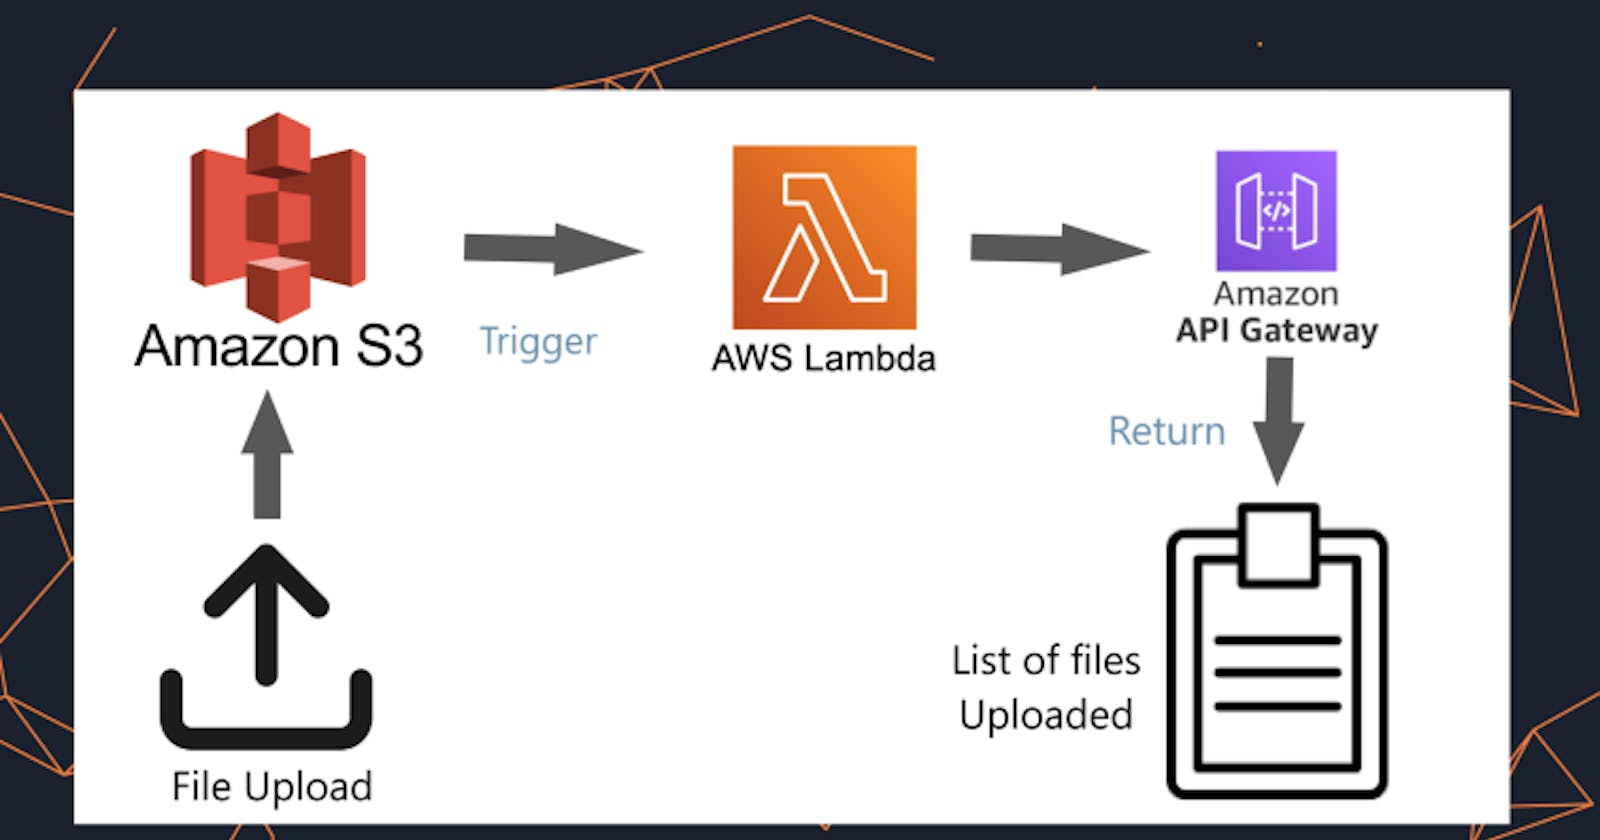 Integrate Lambda with any services like S3, and then integrate Lambda with API Gateway. Once you've completed that, retrieve the Lambda function event